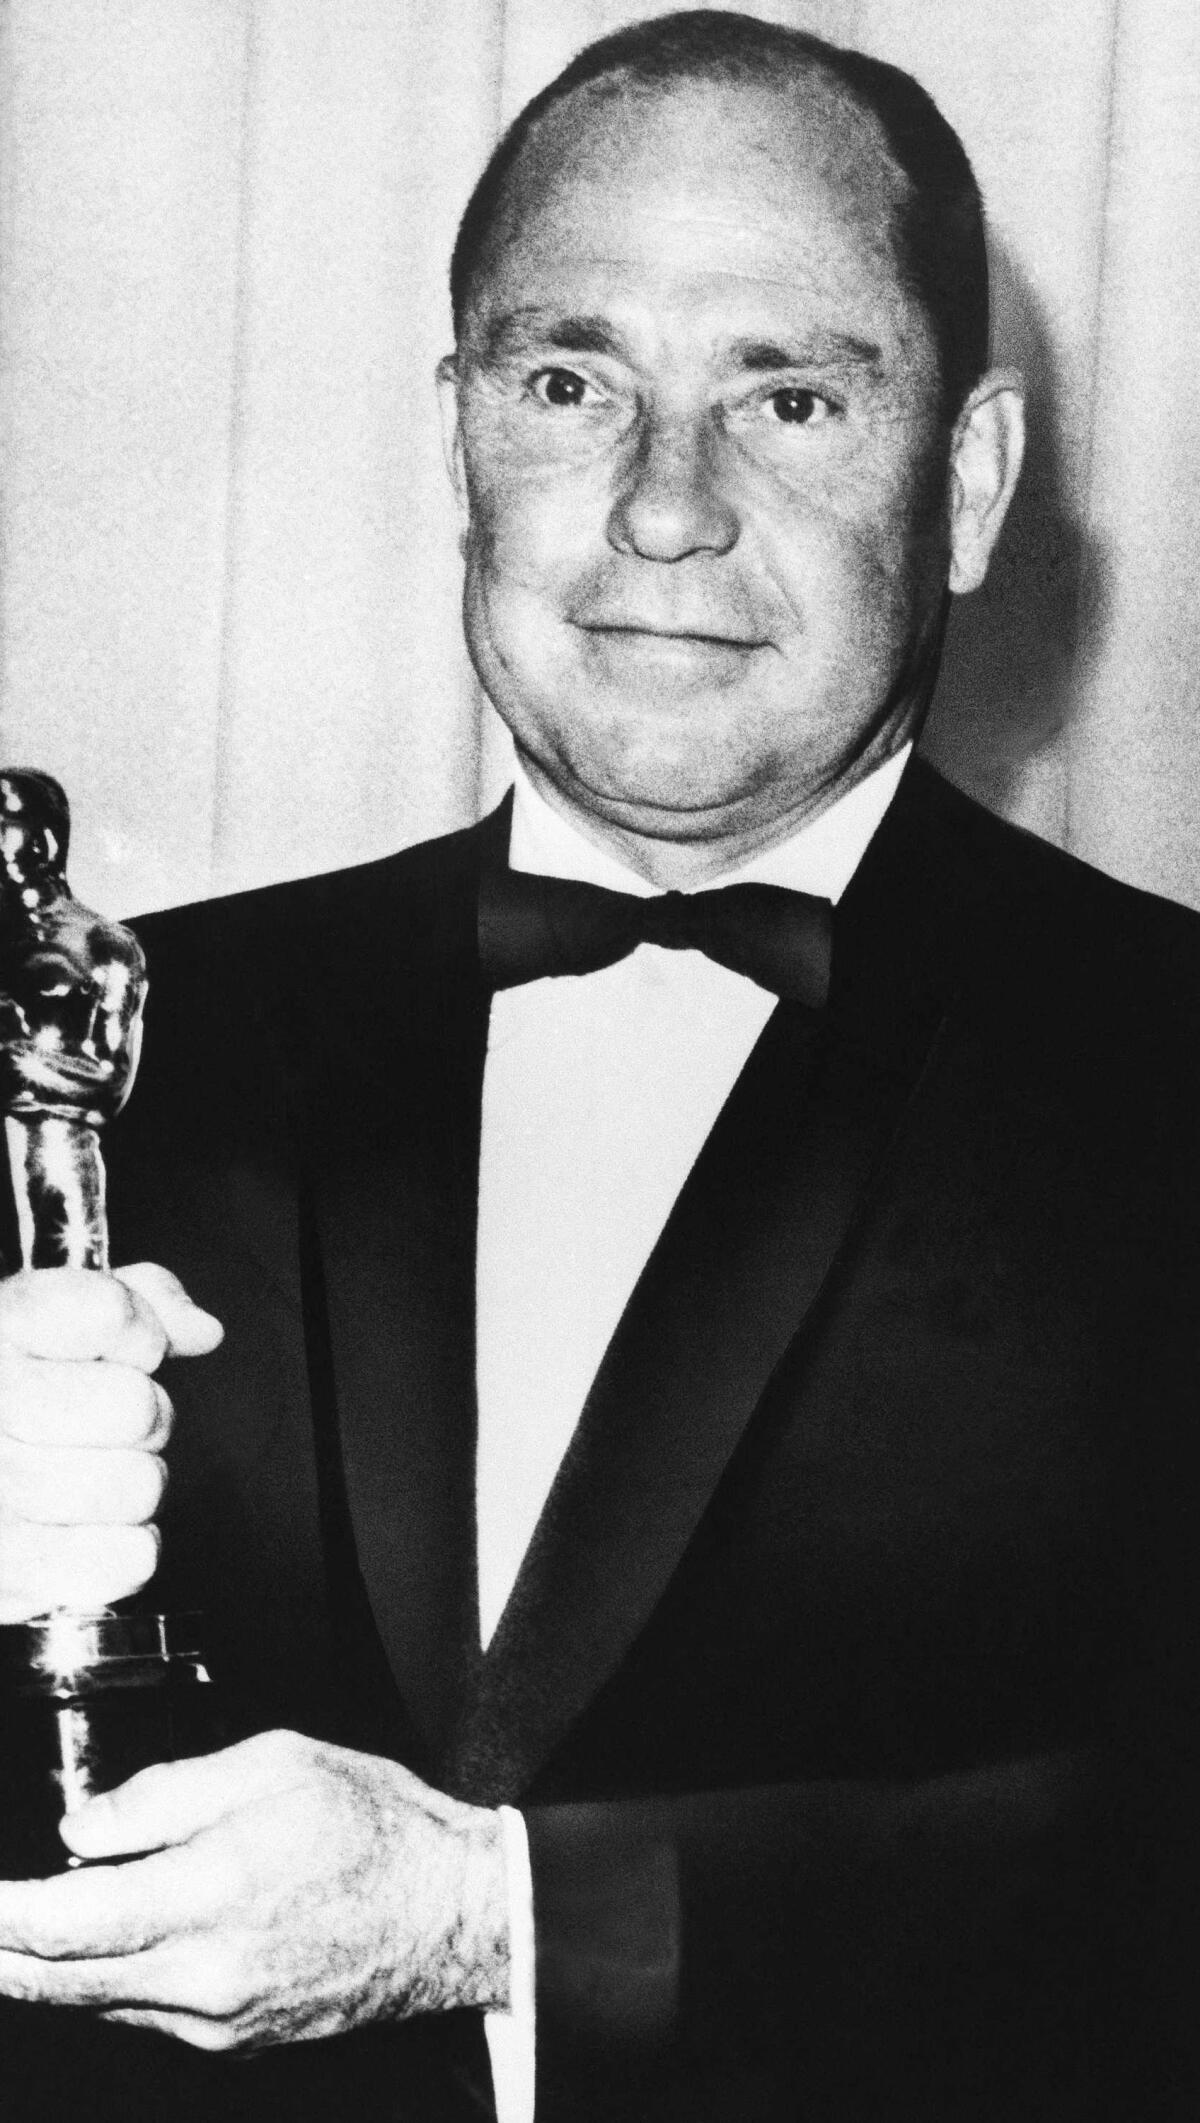 Johnny Mercer with his 1963 Oscar for Best Song, "Days of Wine and Roses."